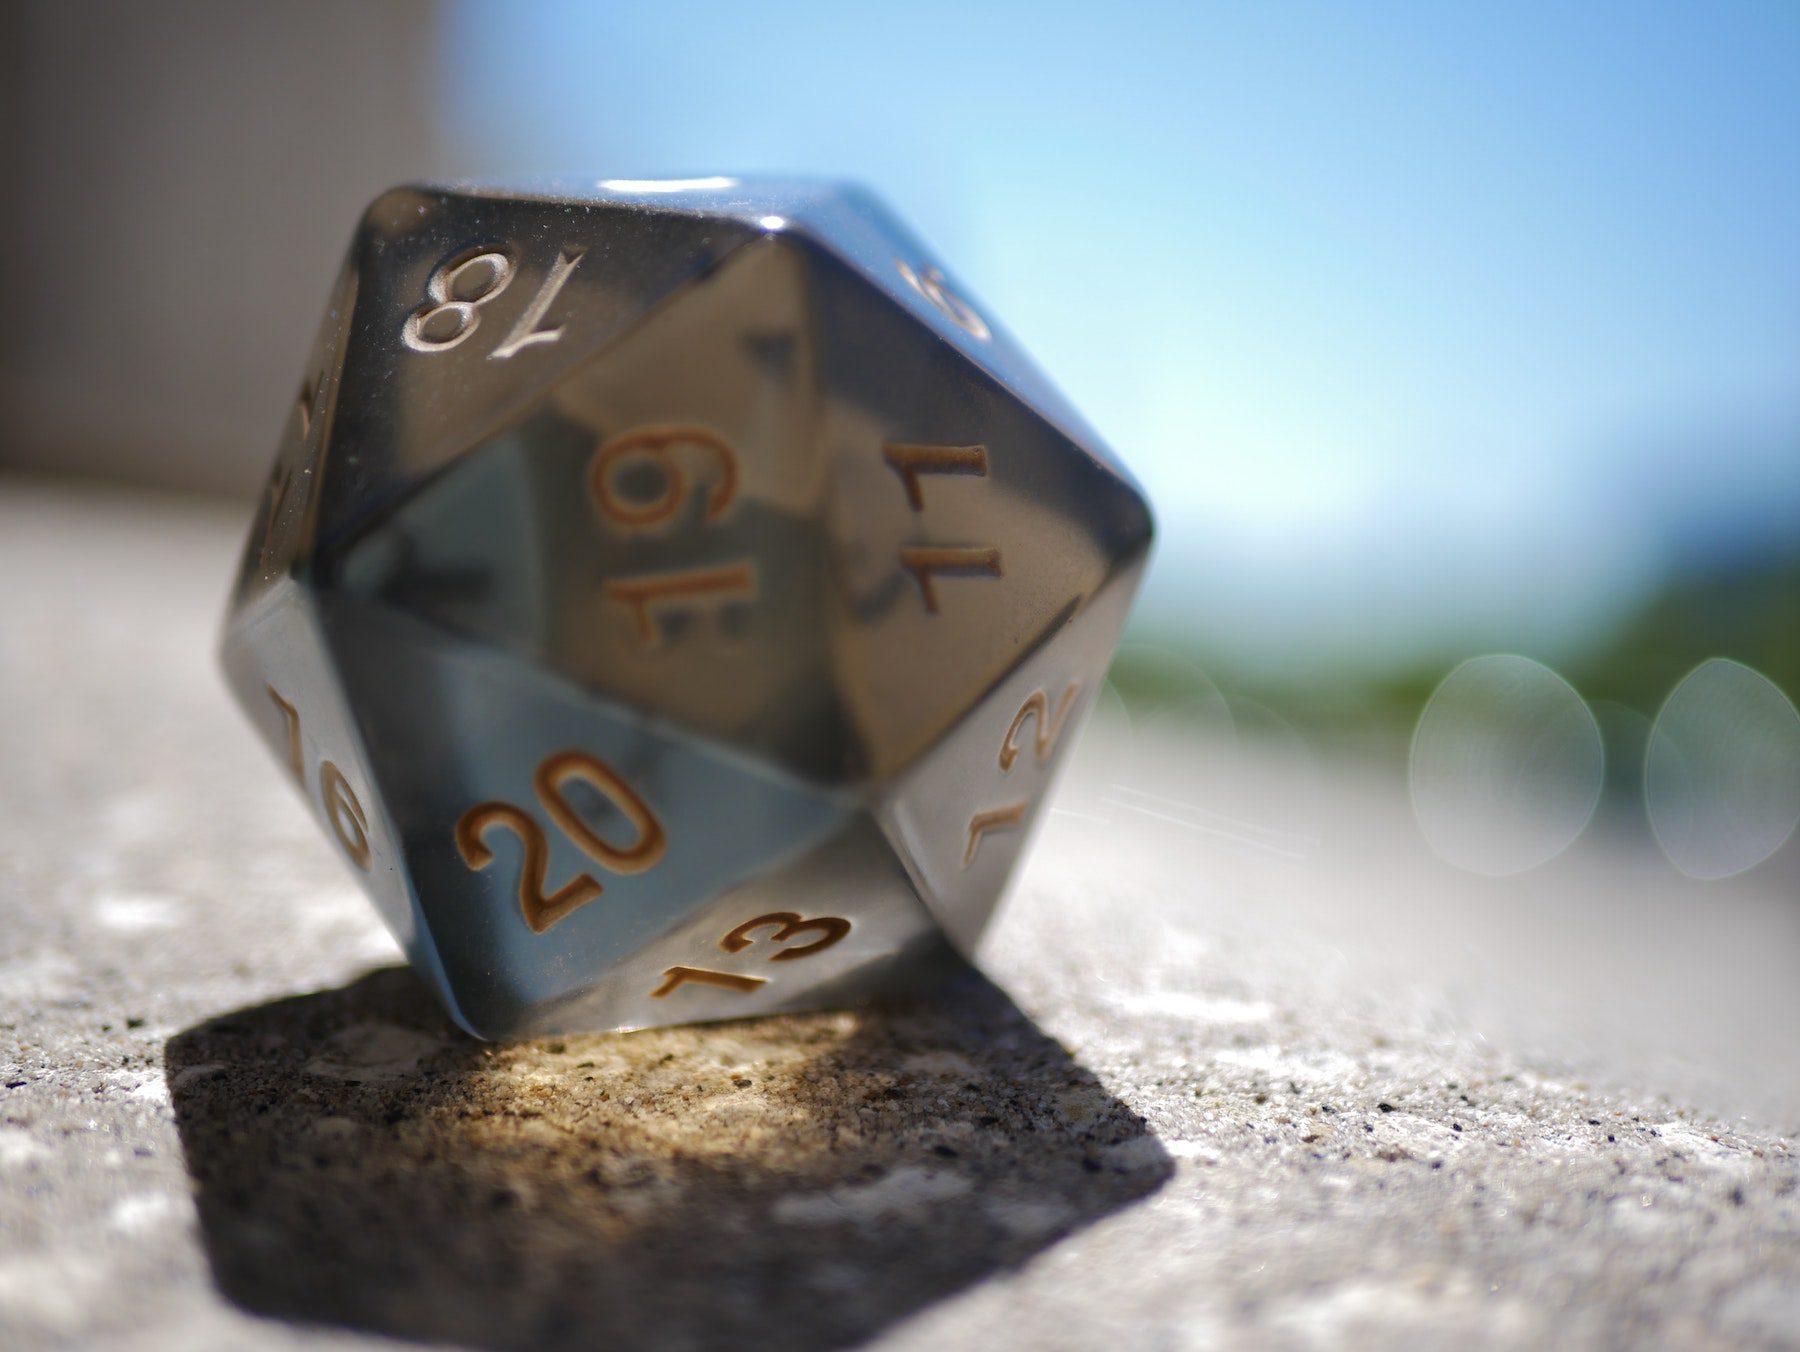 An opaque D20 dice, as used in the tabletop game Dungeons & Dragons, on a sunny windowsill.